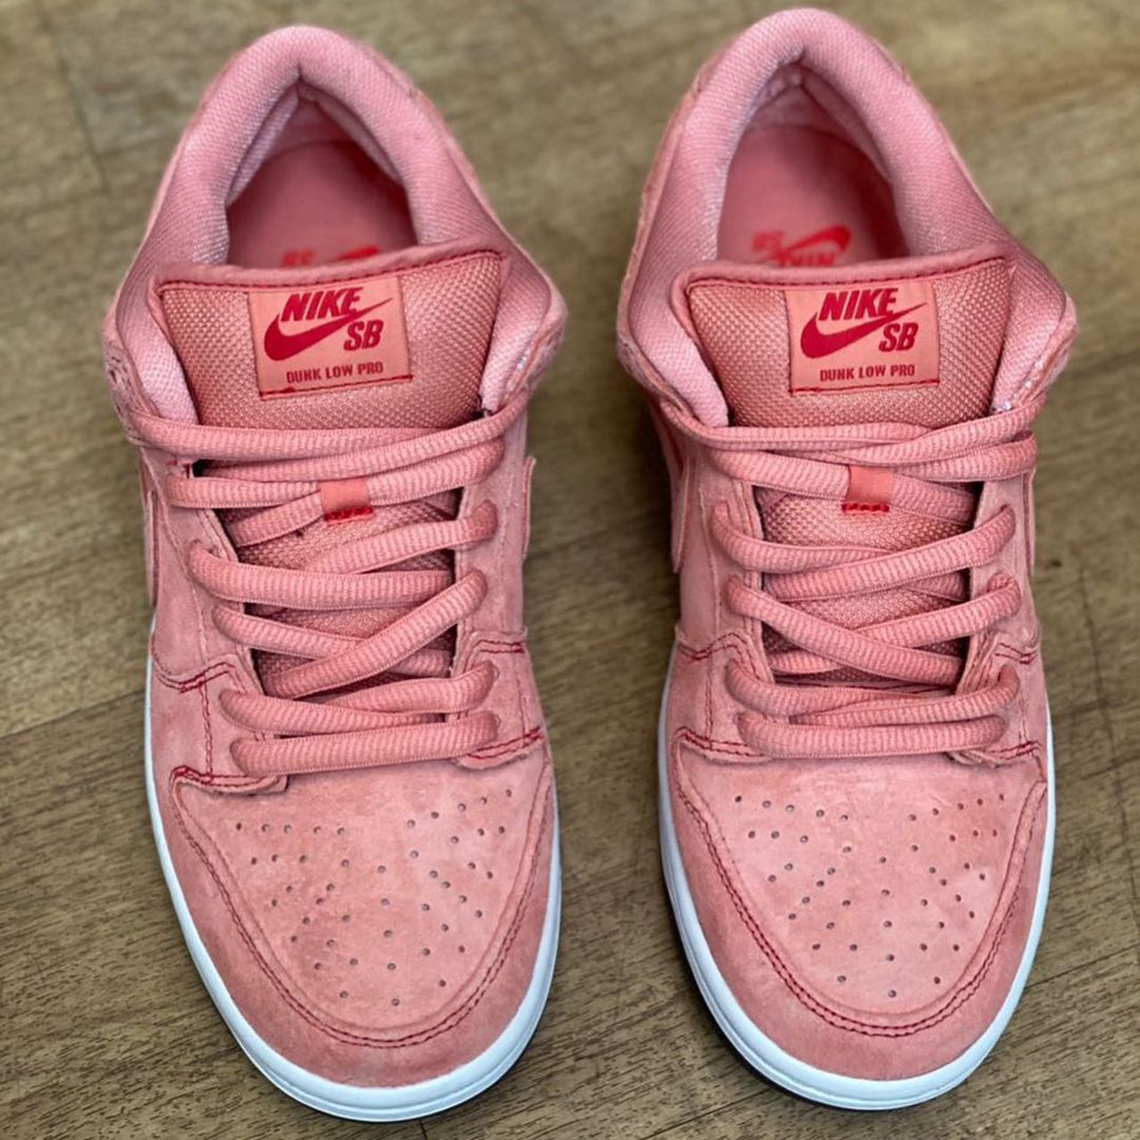 Nike Sb Dunk Low Pink Pig 2021 Release Info 1